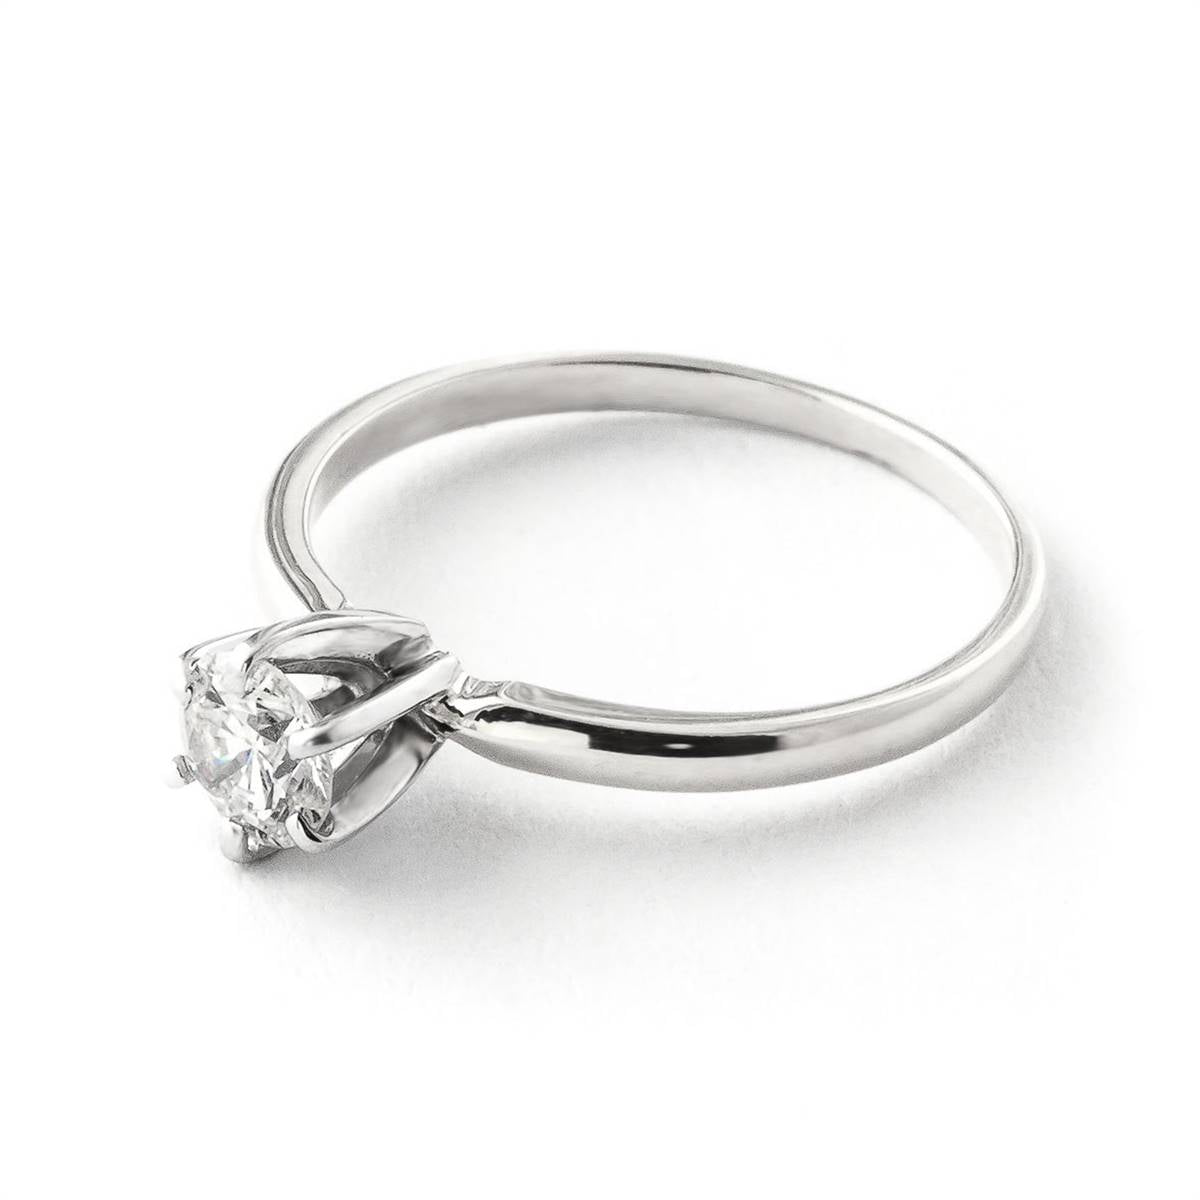 14K Solid White Gold Solitaire Ring w/ 0.40 Carat H-i, Si-2 Natural Diamond